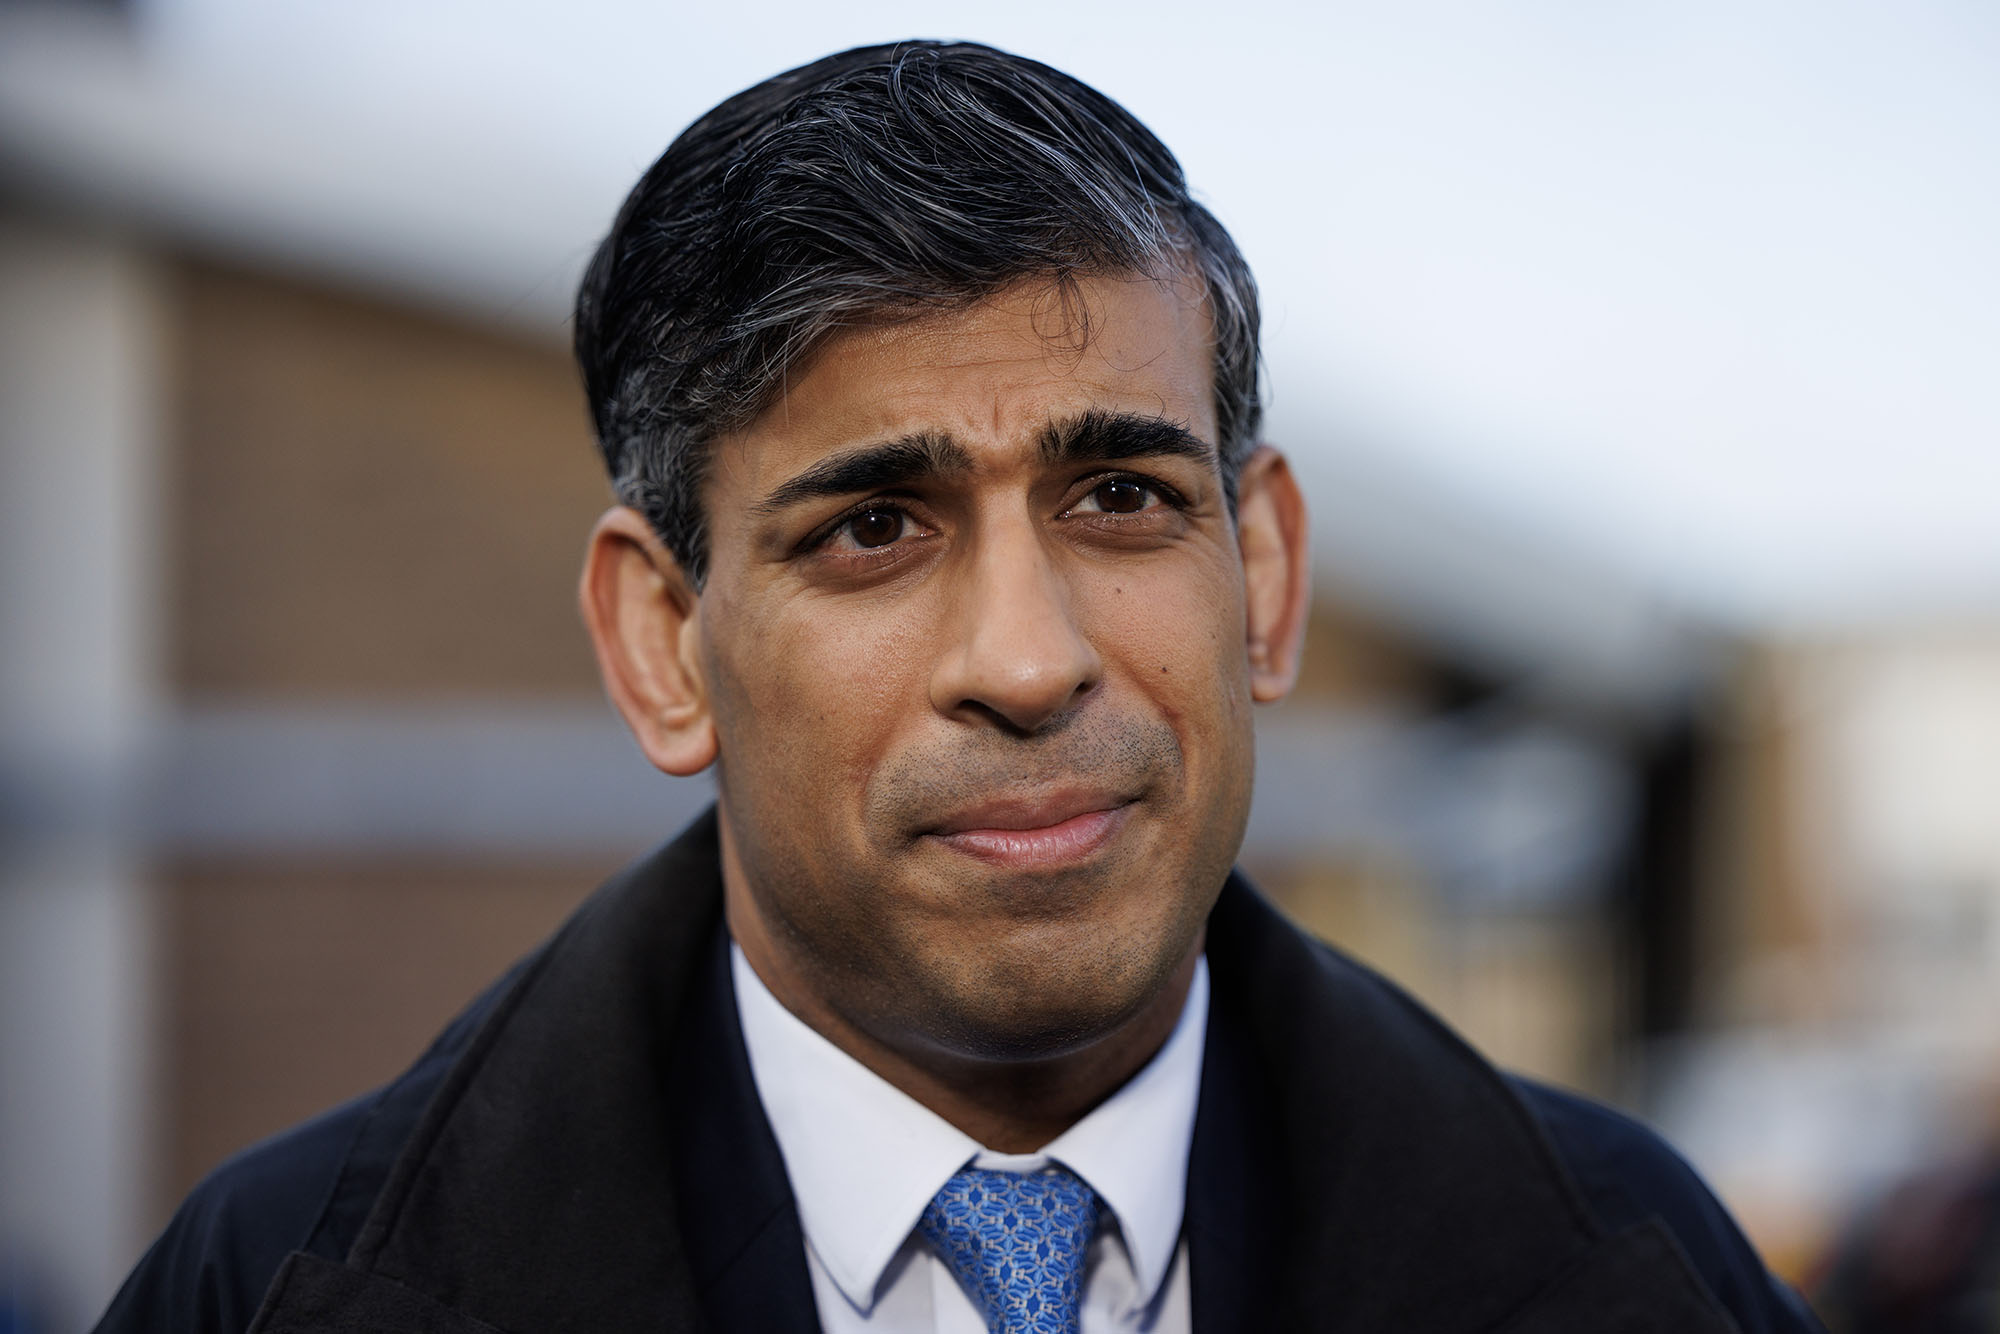 British Prime Minister Rishi Sunak looks on during a media visit to Harlow Police Station on February 16.